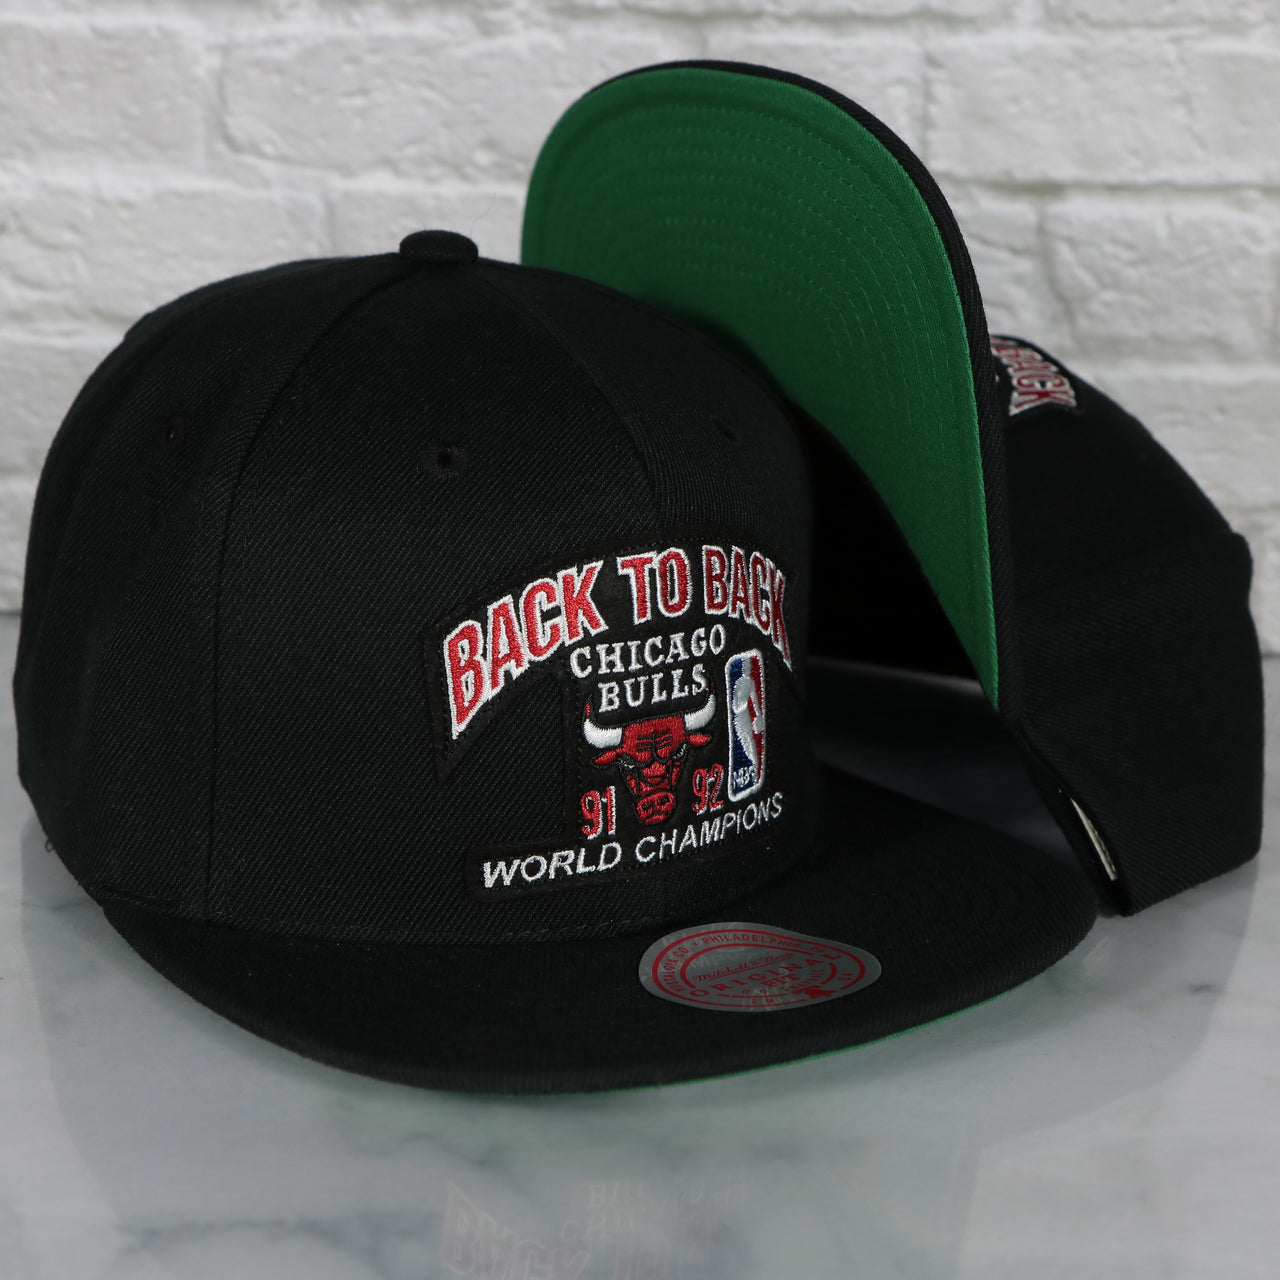 Chicago Bulls Vintage Retro NBA Champions 91-92 Back to Back Mitchell and Ness Snapback Hat | Black